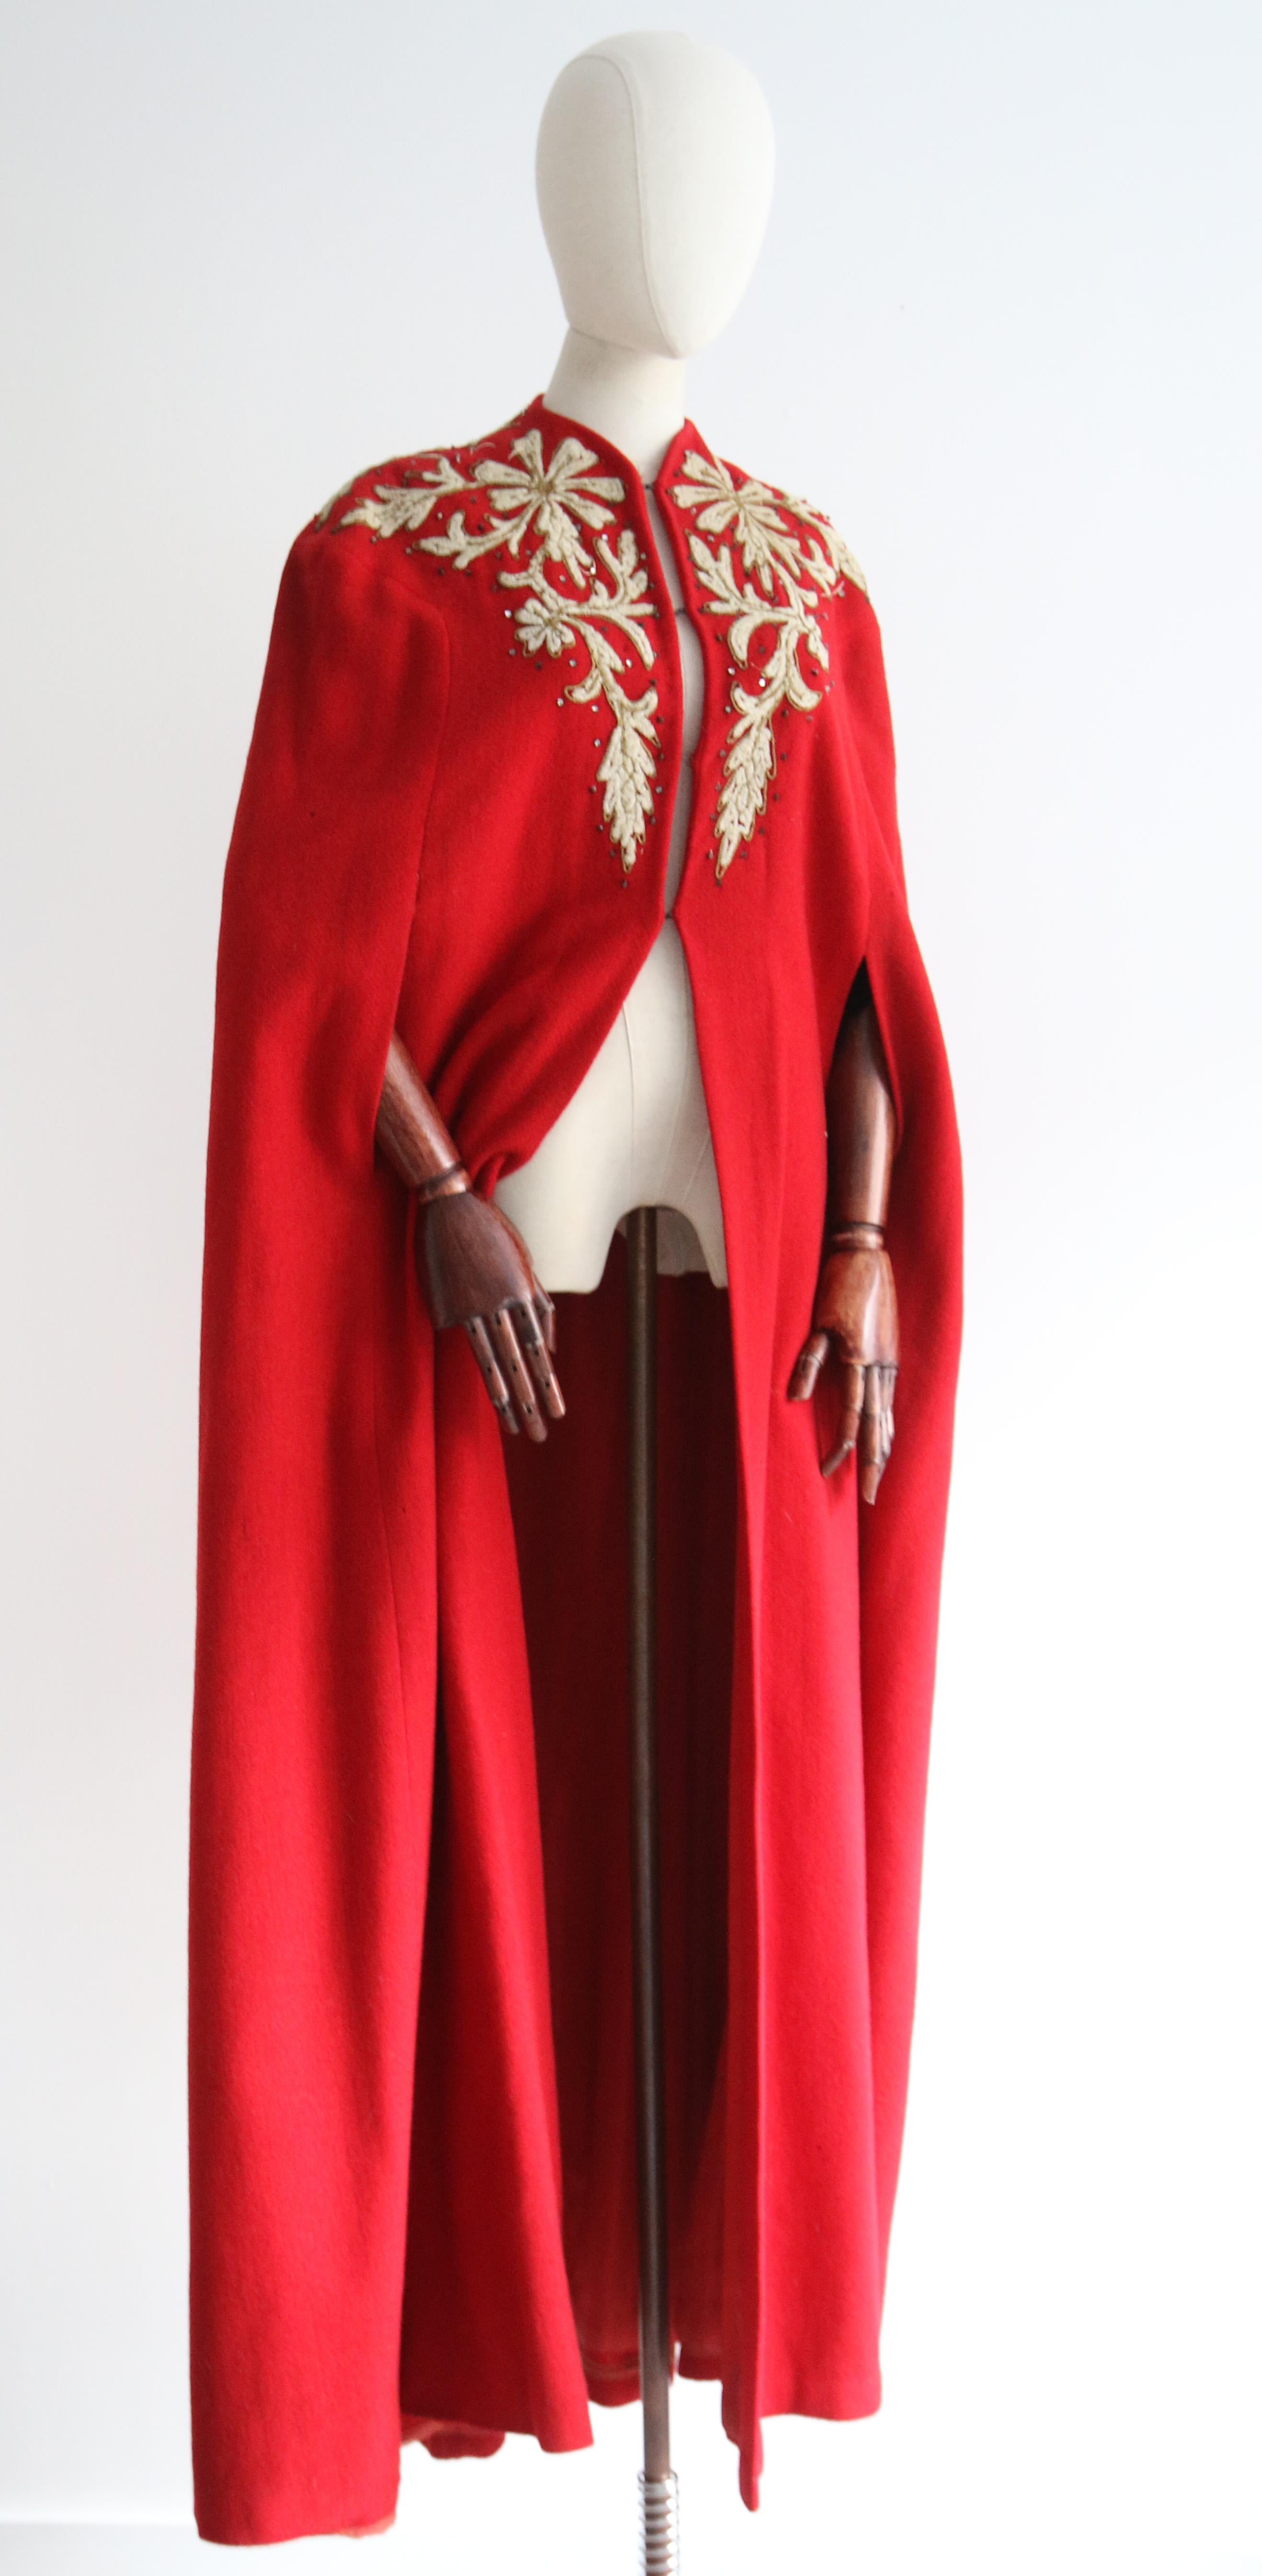 Women's or Men's Vintage Early 1940's Red Wool Embroidered Cape UK 10-16 US 6-12 For Sale